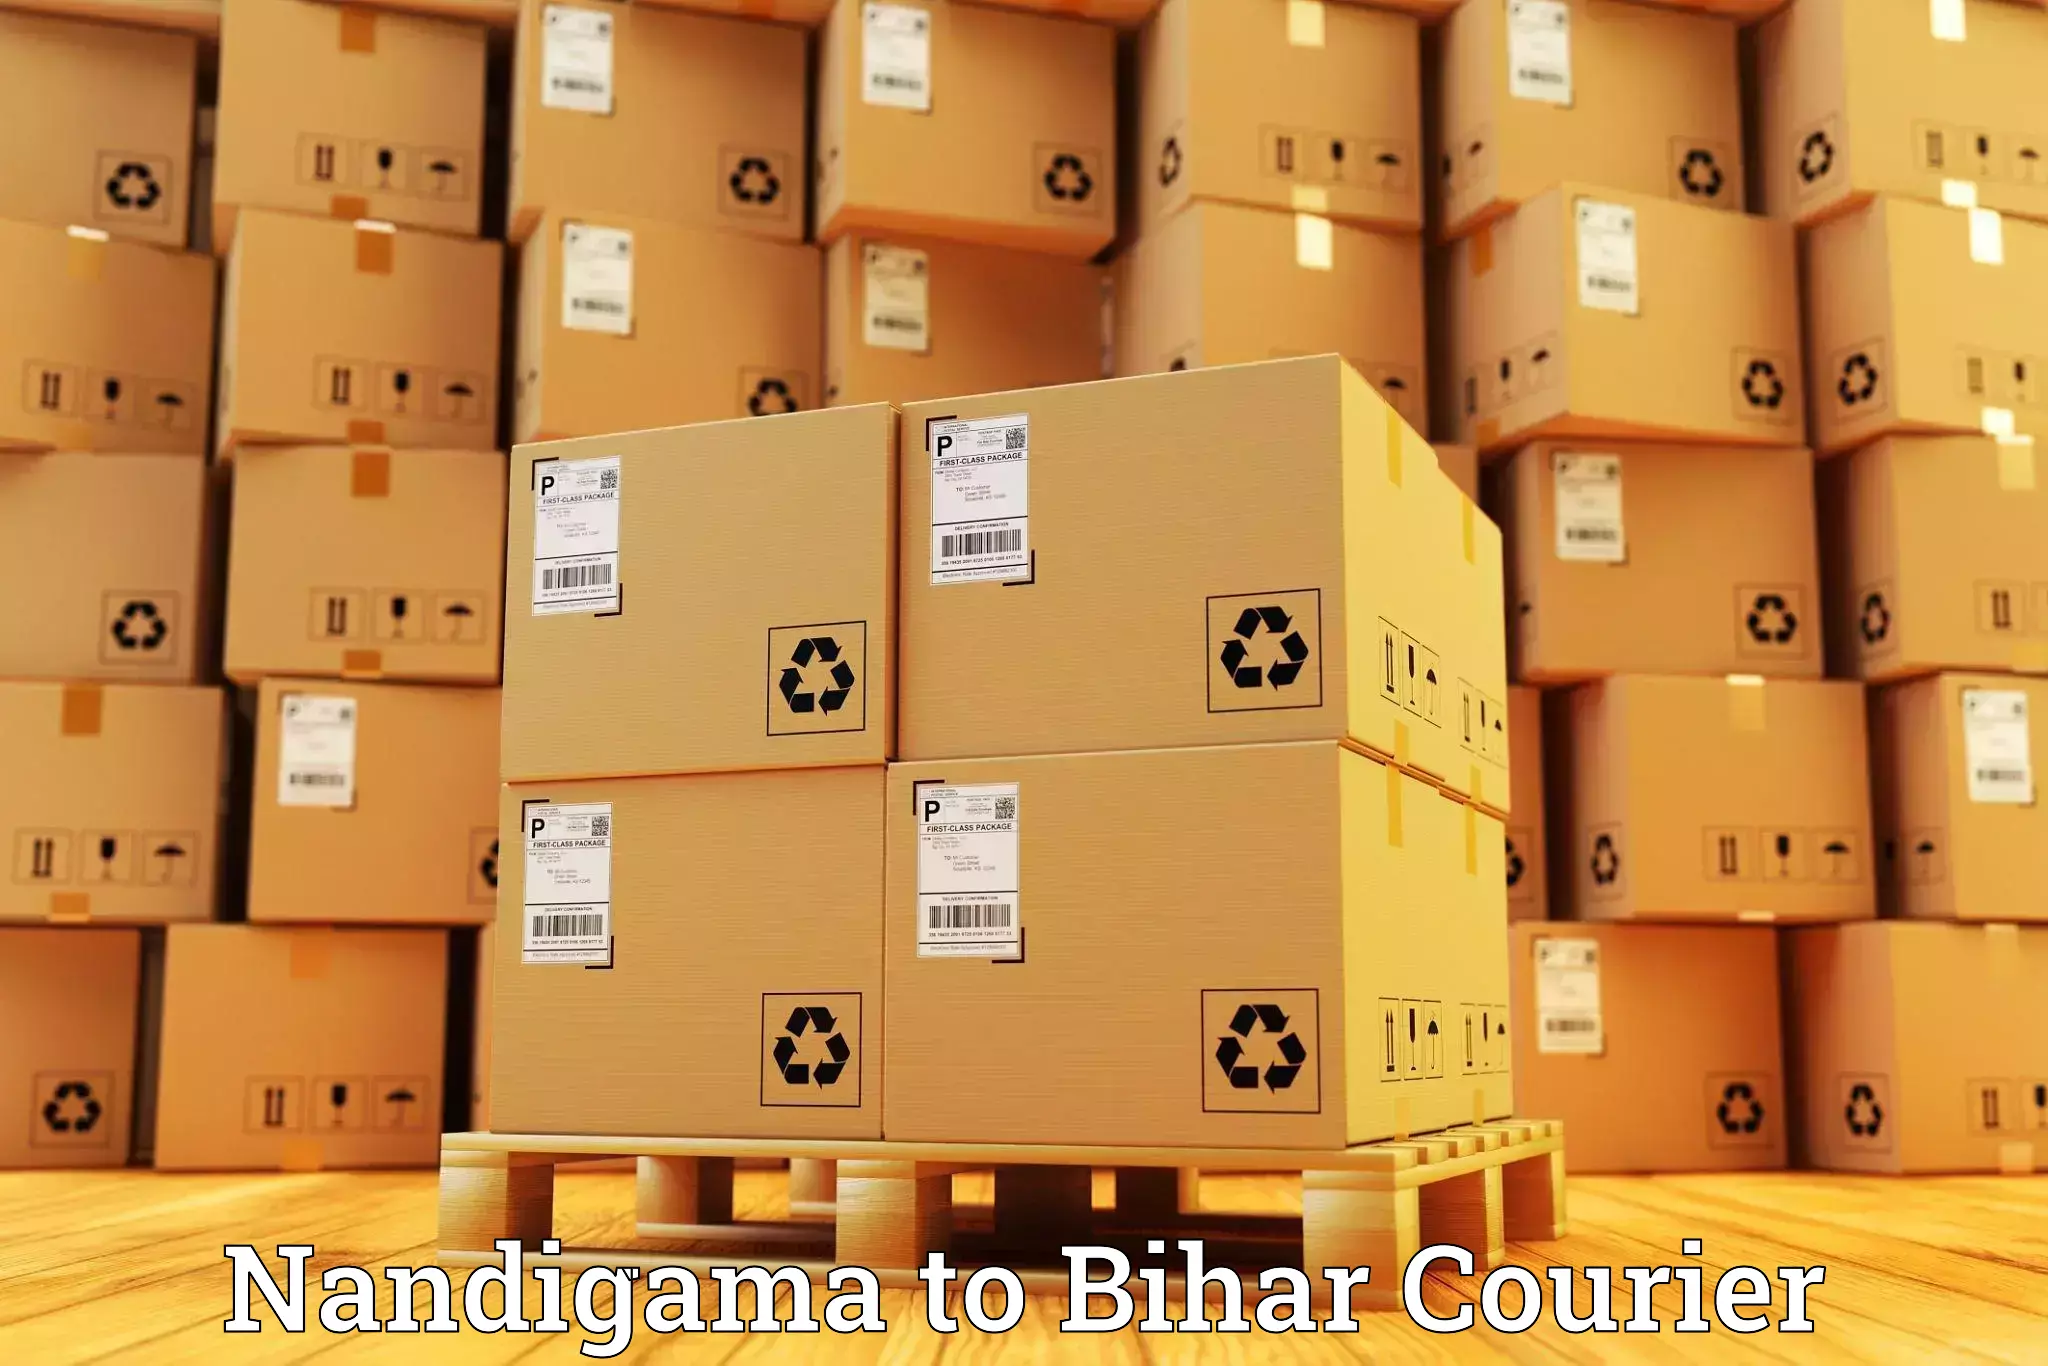 State-of-the-art courier technology Nandigama to Khodaganj